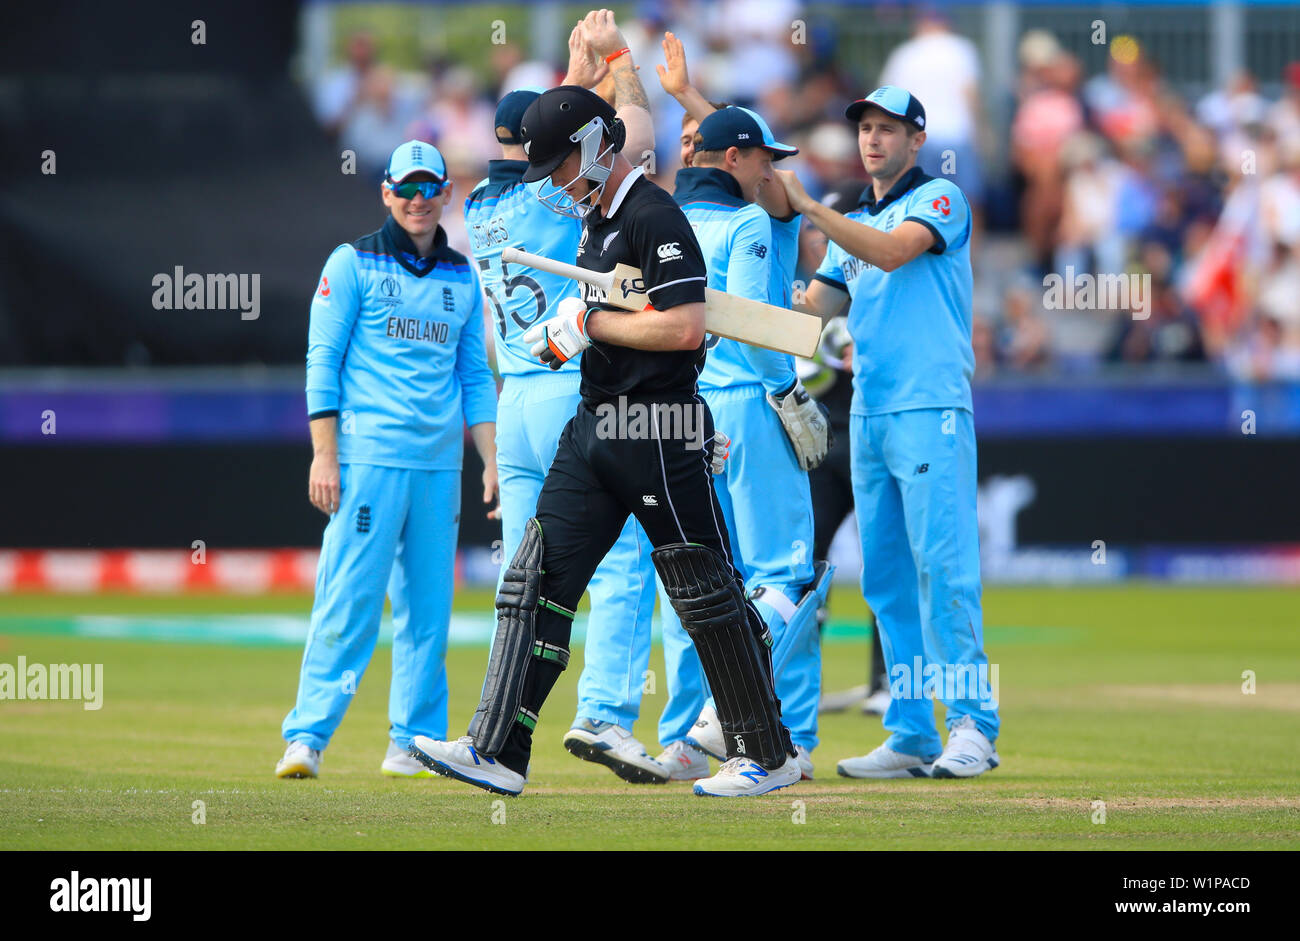 New Zealand's Jimmy Neesham after being bowled out by England's Mark Woods during the ICC cricket World Cup group stage match at Riverside Durham, Chester-le-Street. Stock Photo